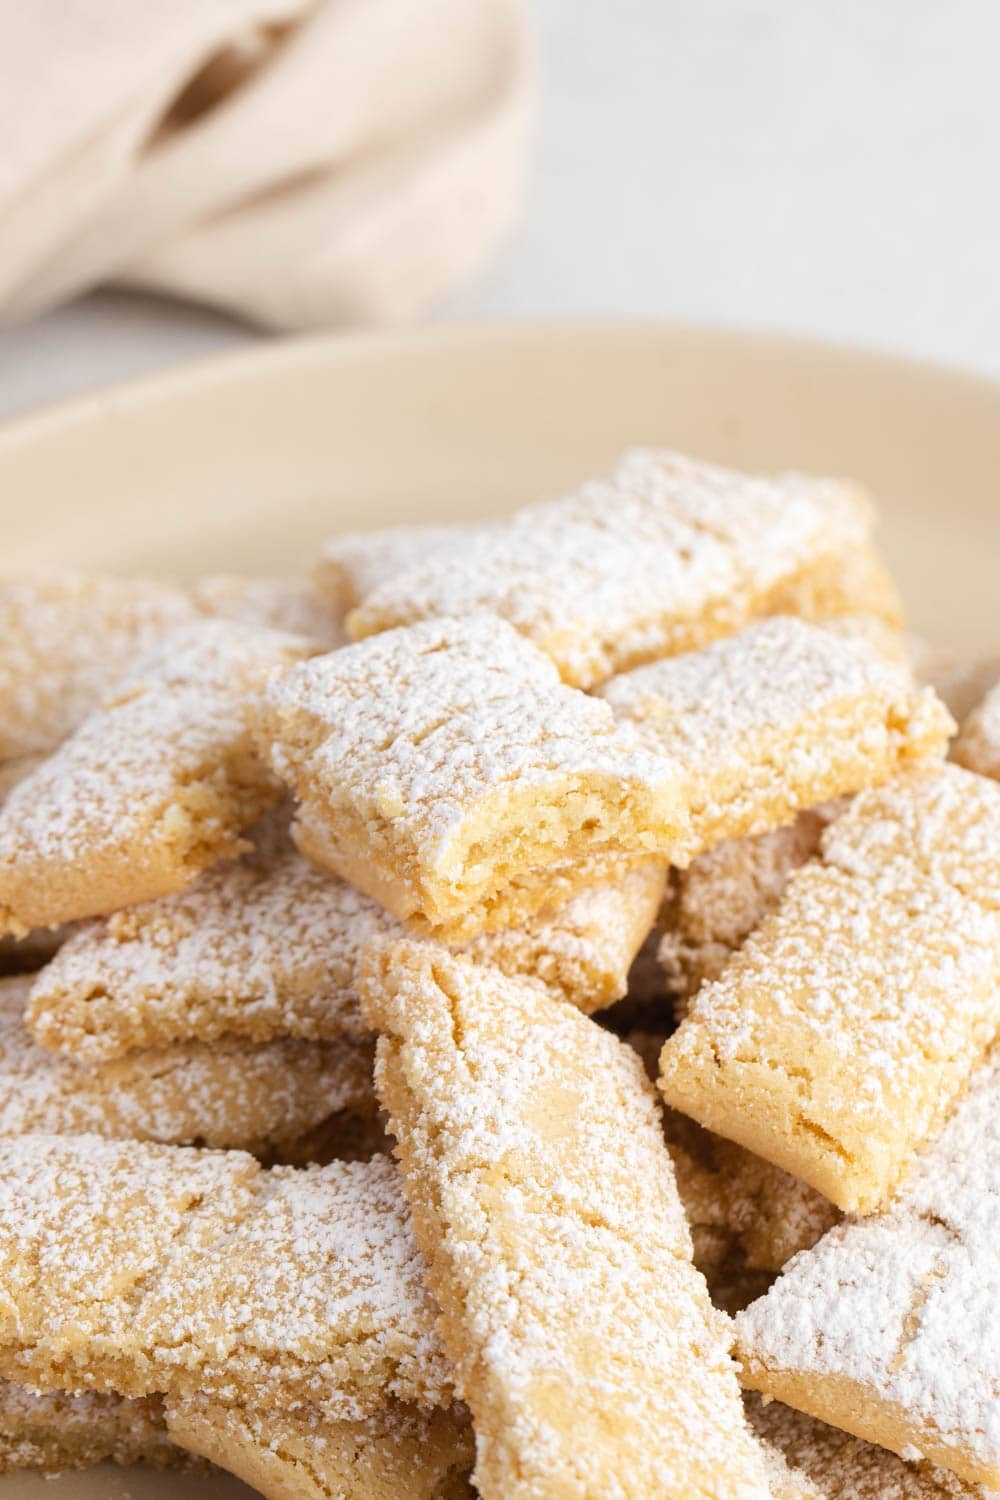 Buttery and Crunchy Swedish Butter Cookies Coated With Confectionary Sugar, Served on a Plate